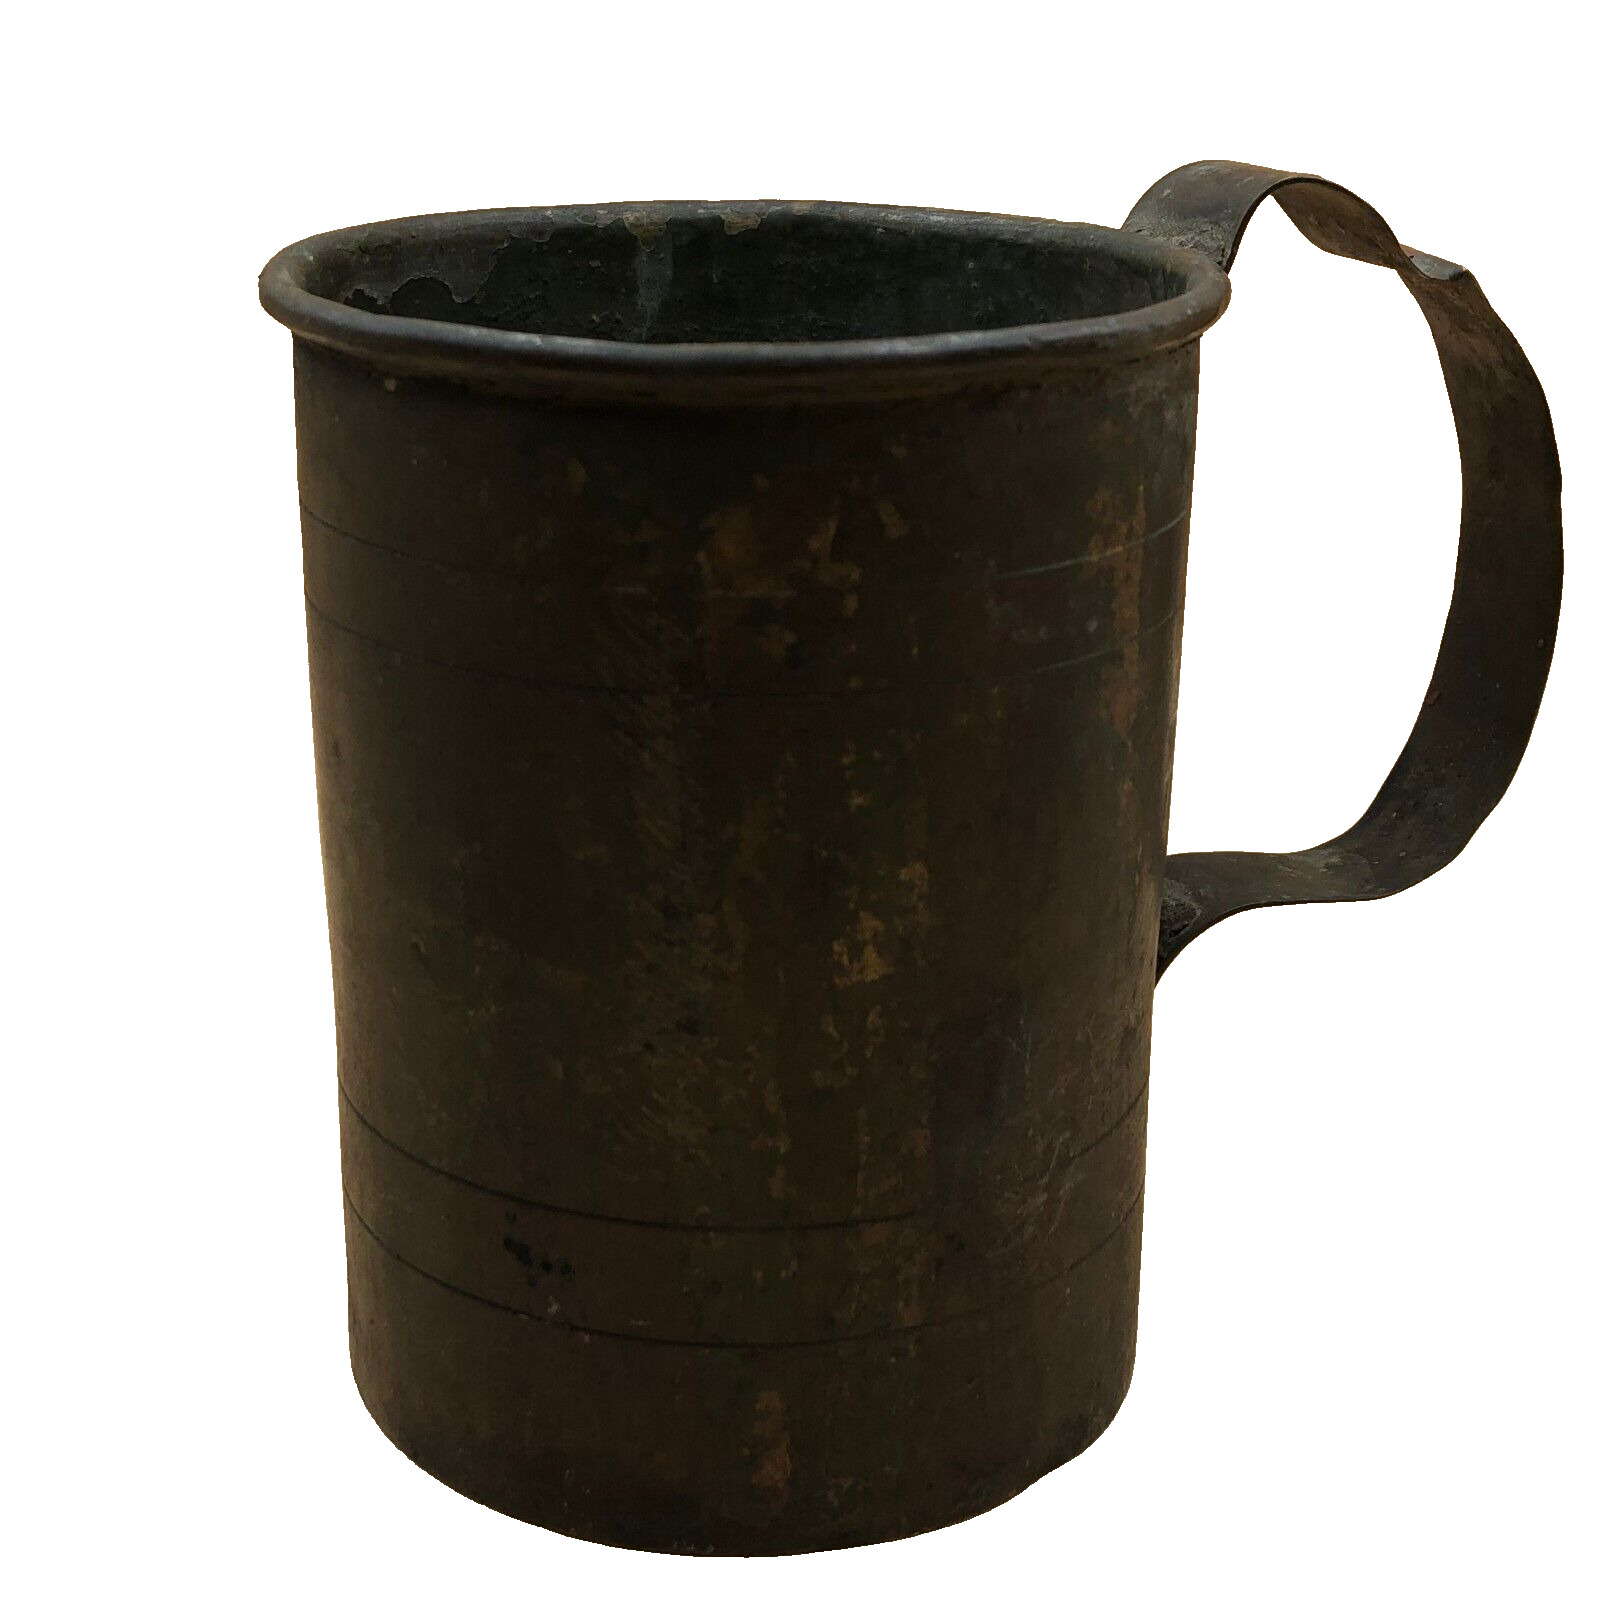 Original WW1 WWI German army Soldier's Cup from the positions of the eastern fro